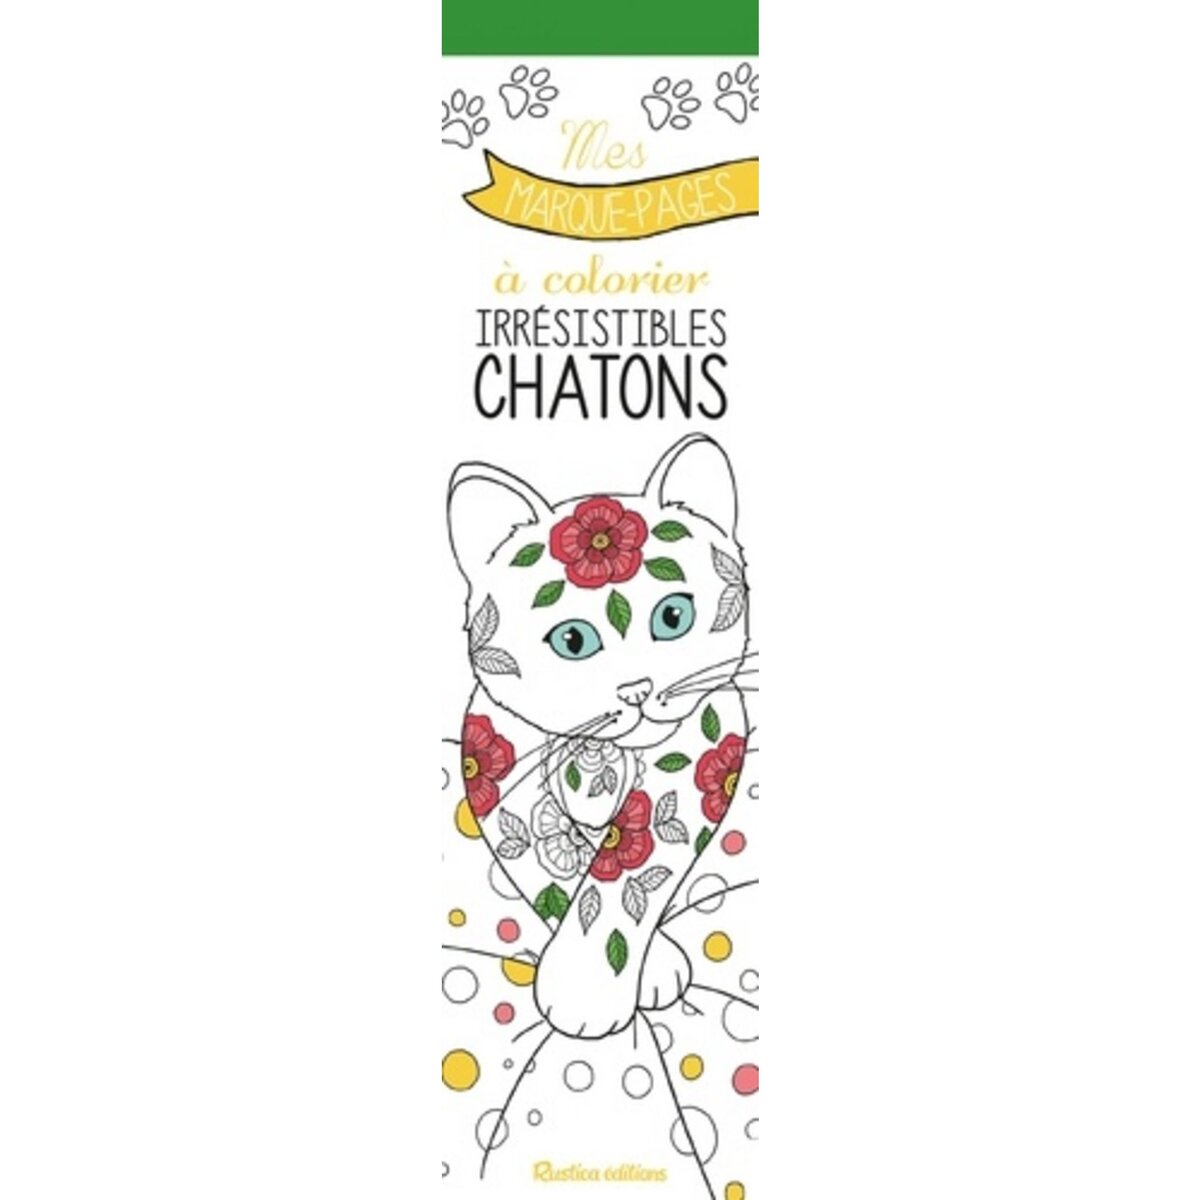  IRRESISTIBLES CHATONS. MES MARQUE-PAGES A COLORIER, Zottino Marica